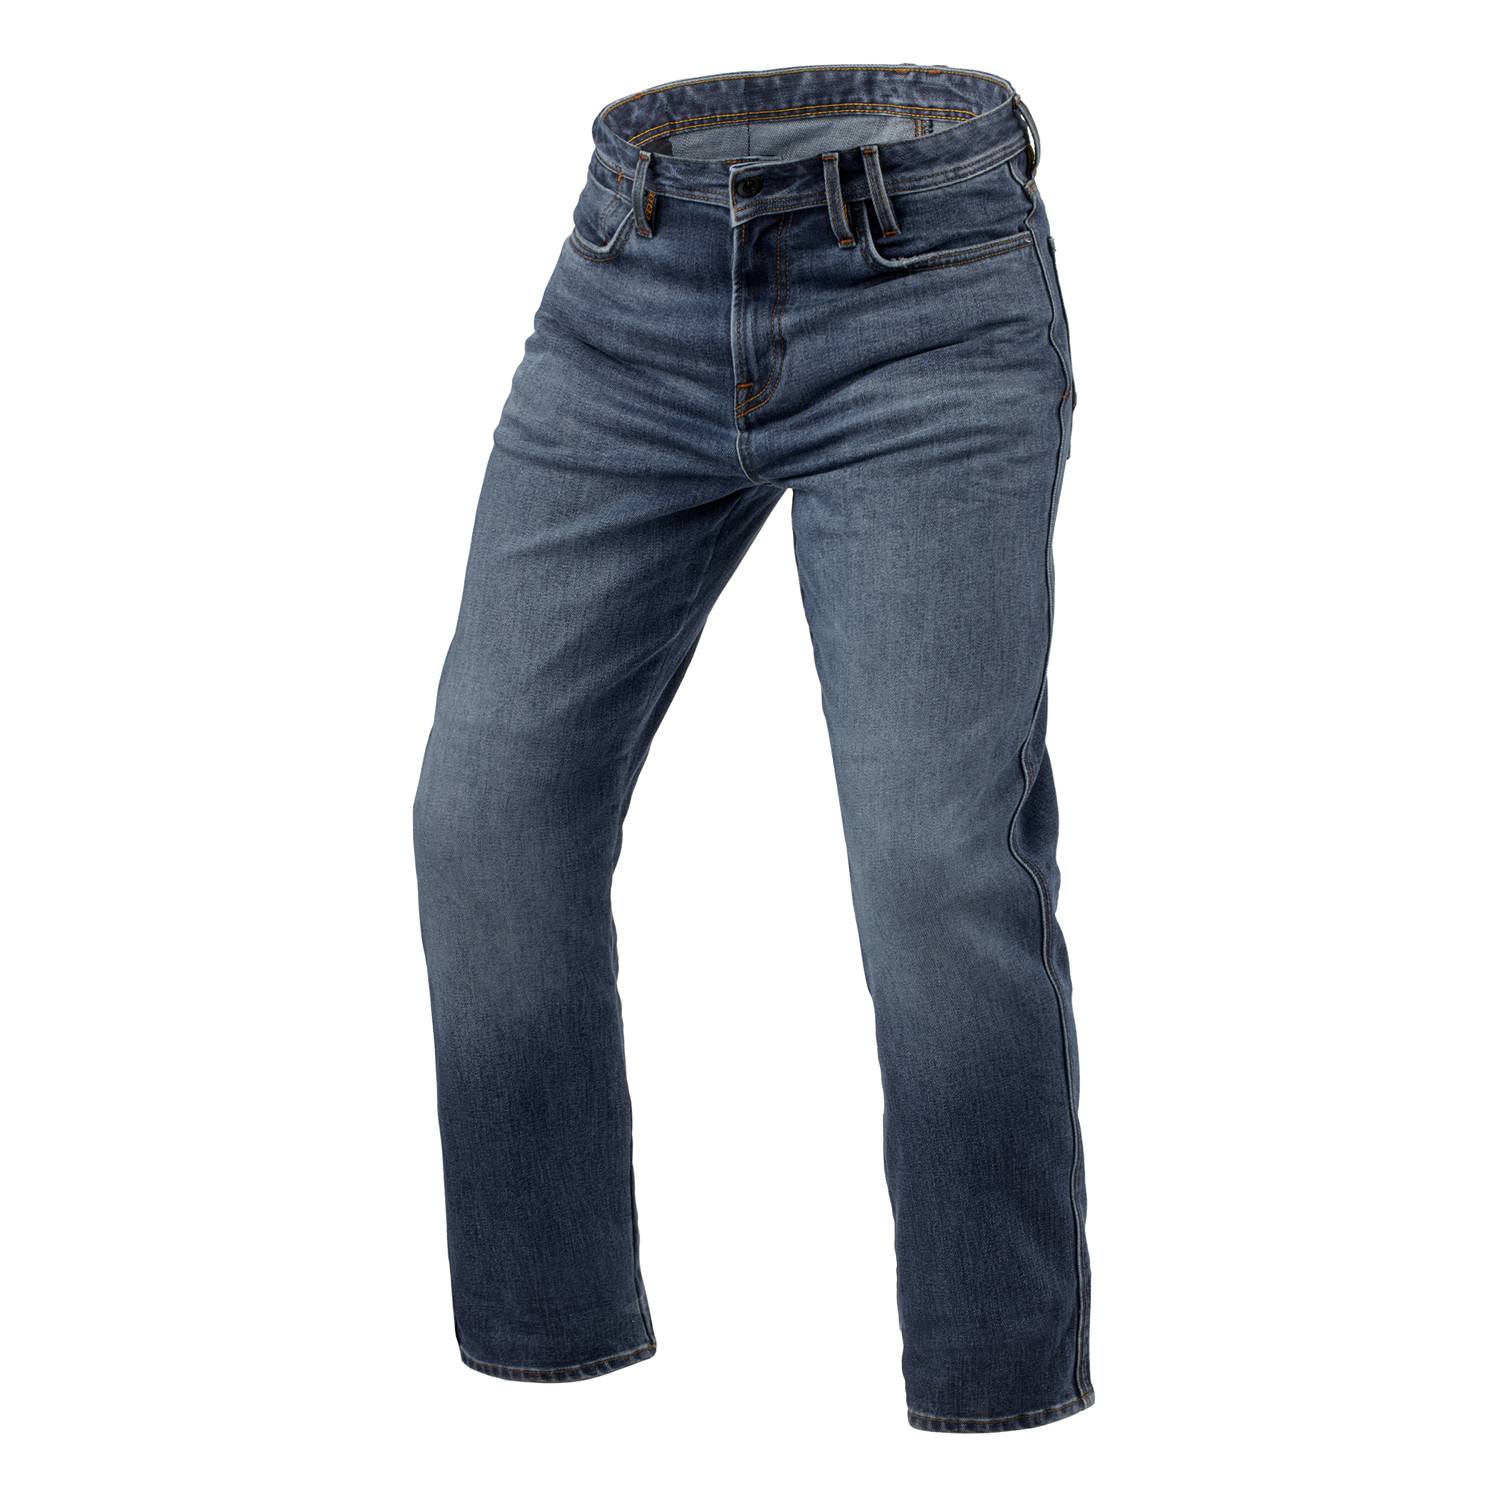 Image of REV'IT! Jeans Lombard 3 RF Medium Blue Stone L36 Motorcycle Jeans Taille L36/W33